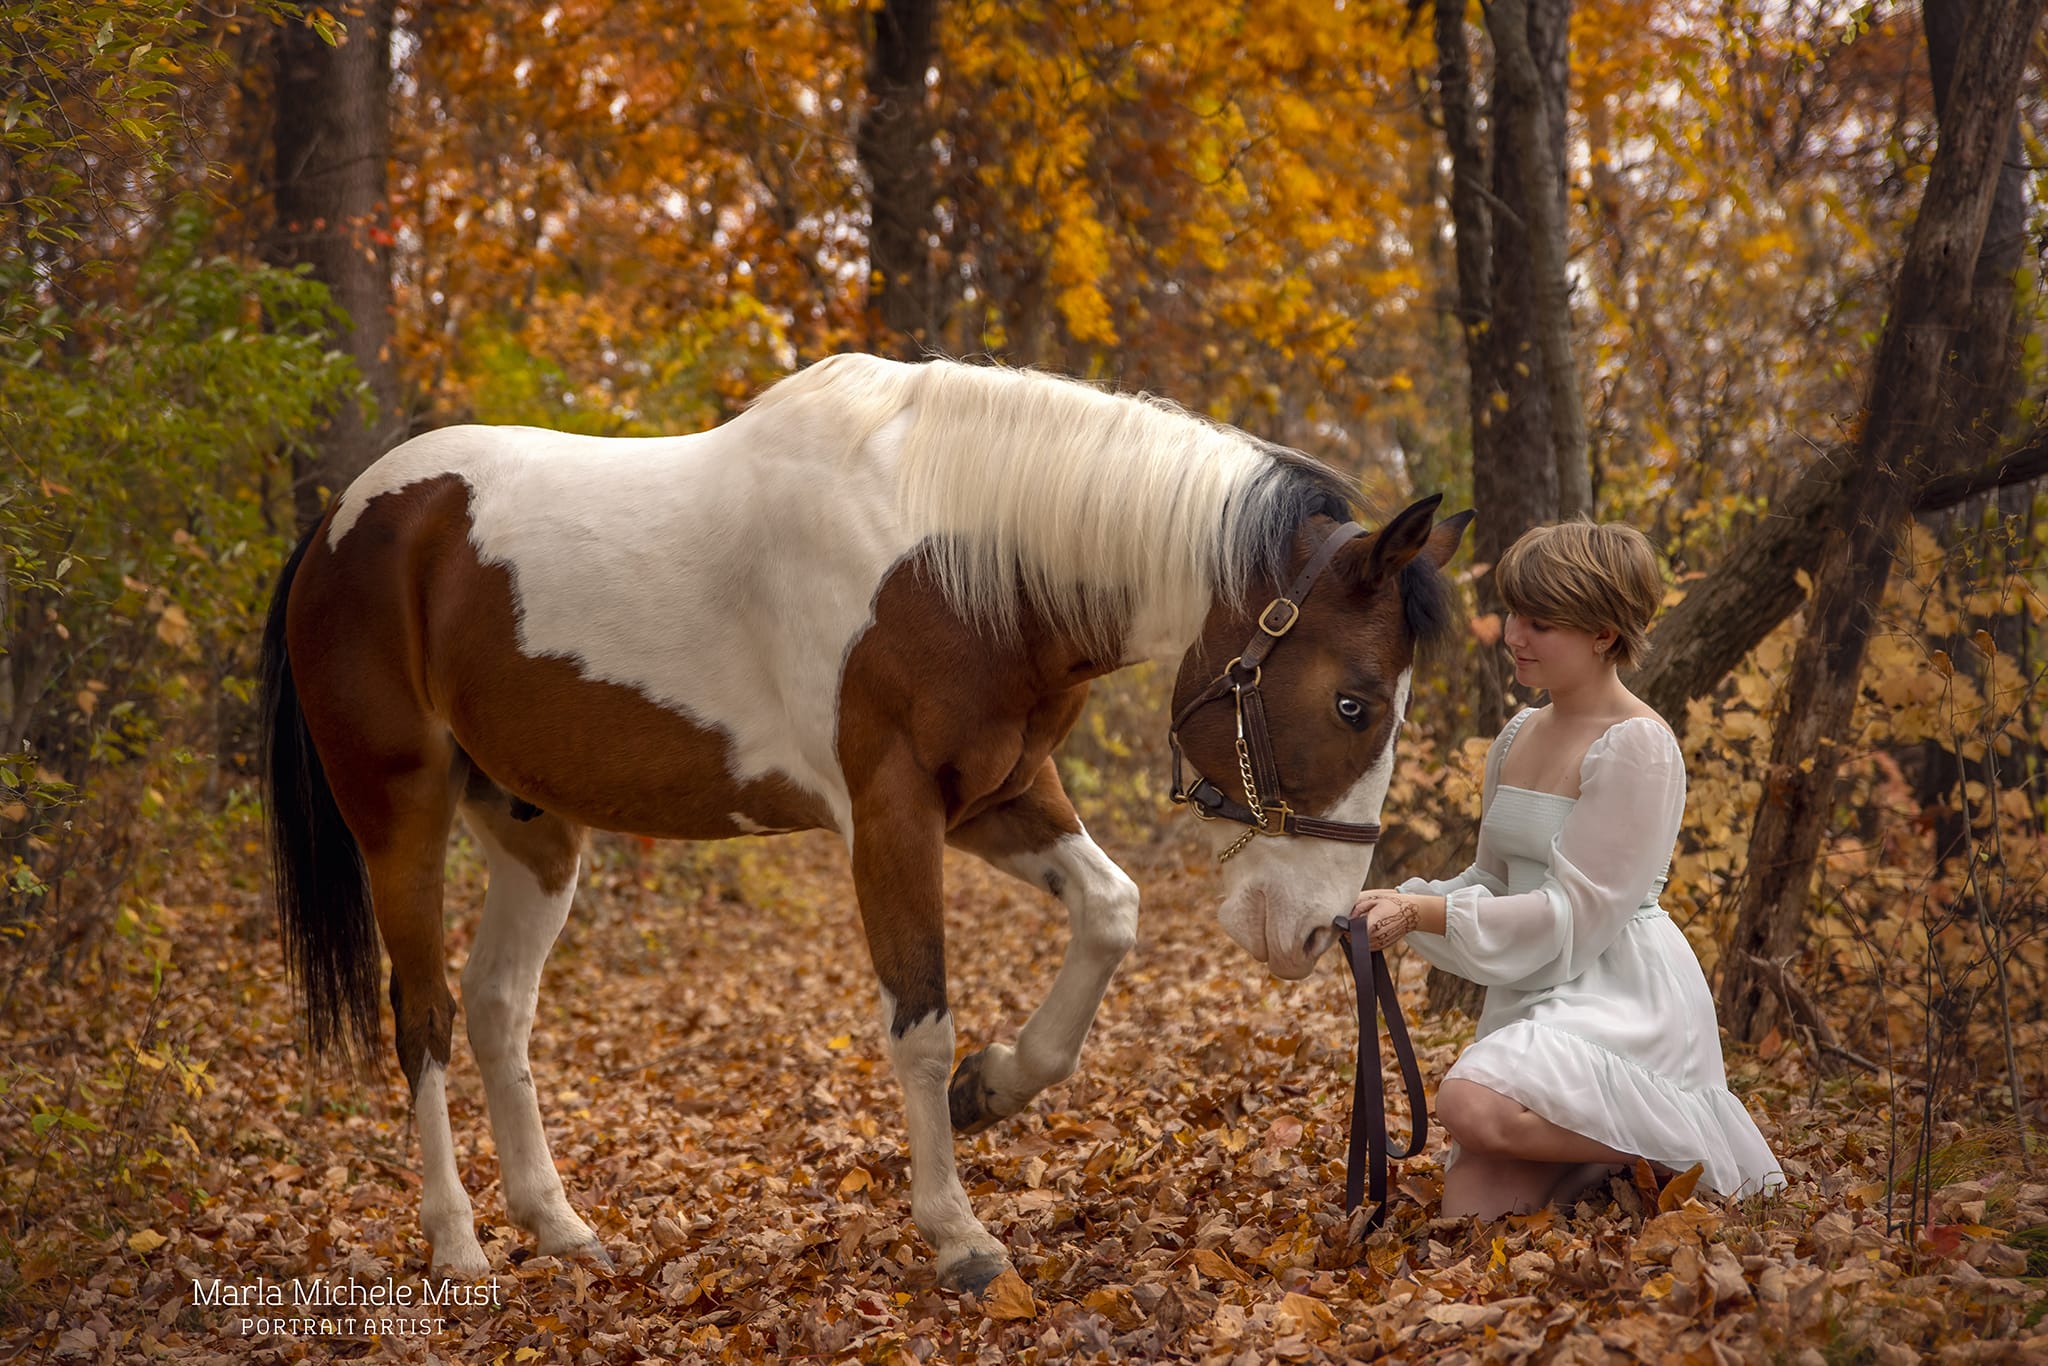 A serene photograph captured by a Detroit equine photographer unfolds as a woman sits among the fallen leaves, accompanied by a graceful horse.